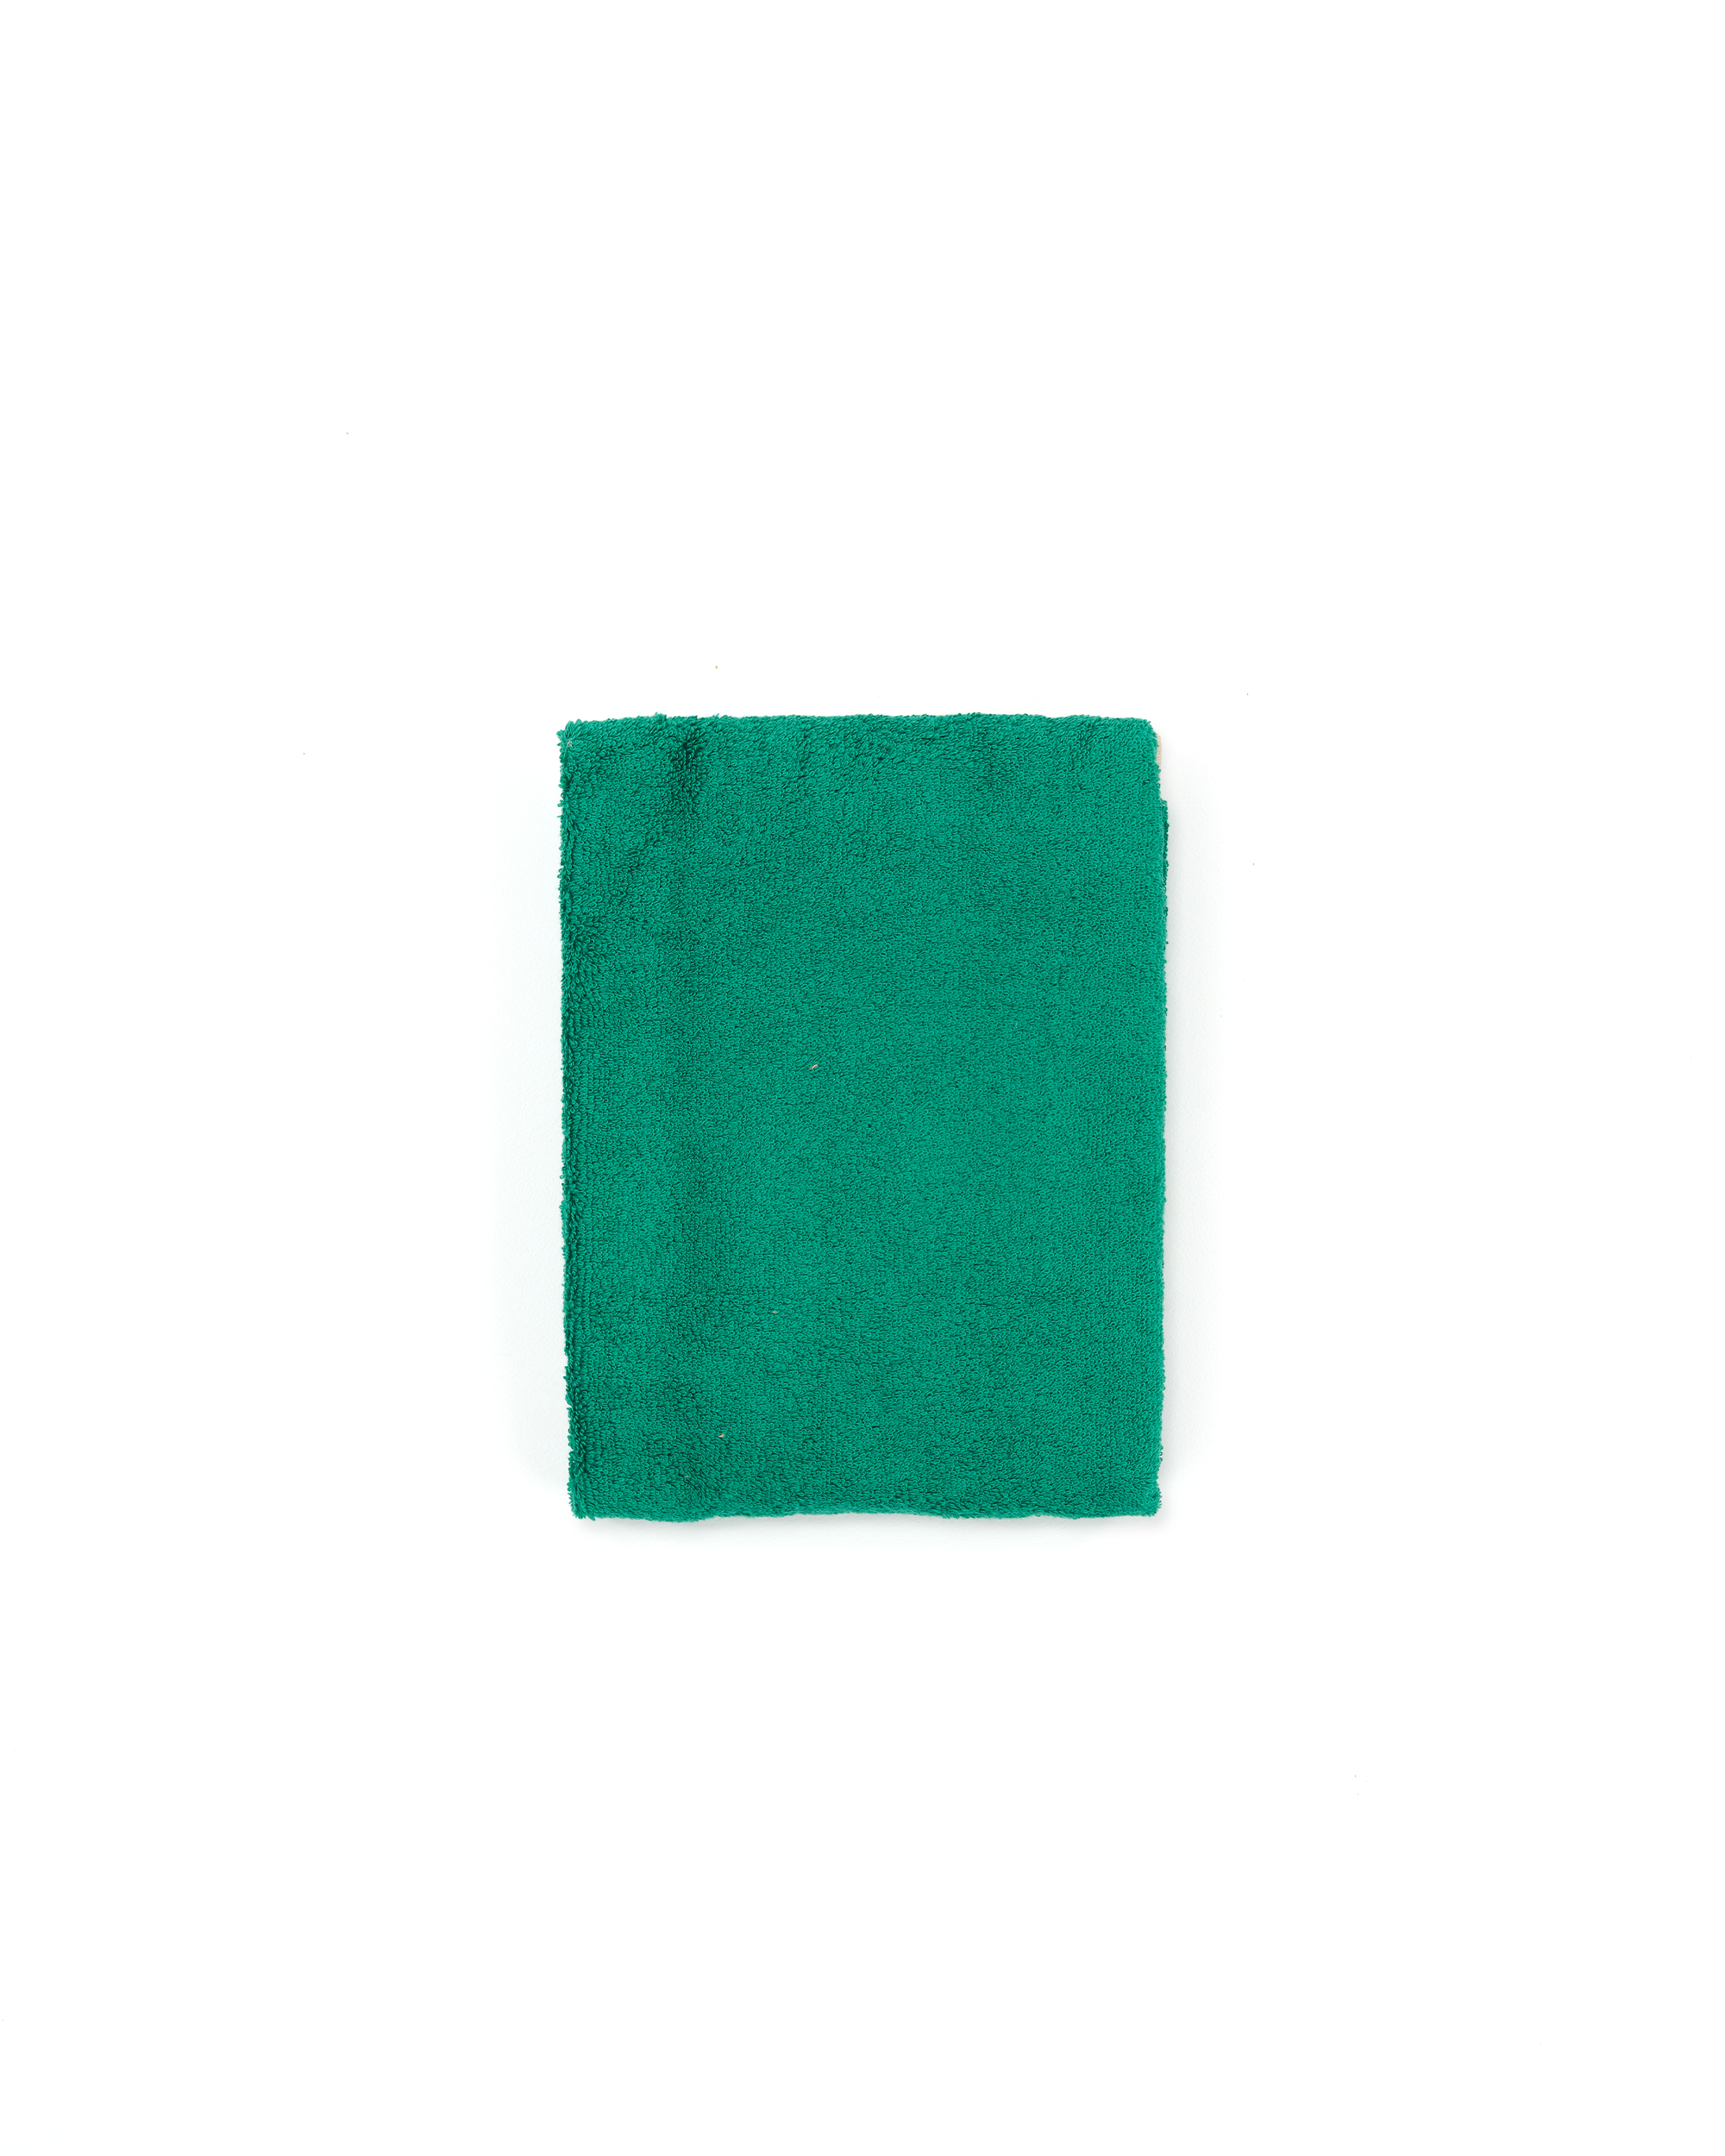 Two Tone Hand Towel - Teal / Coral